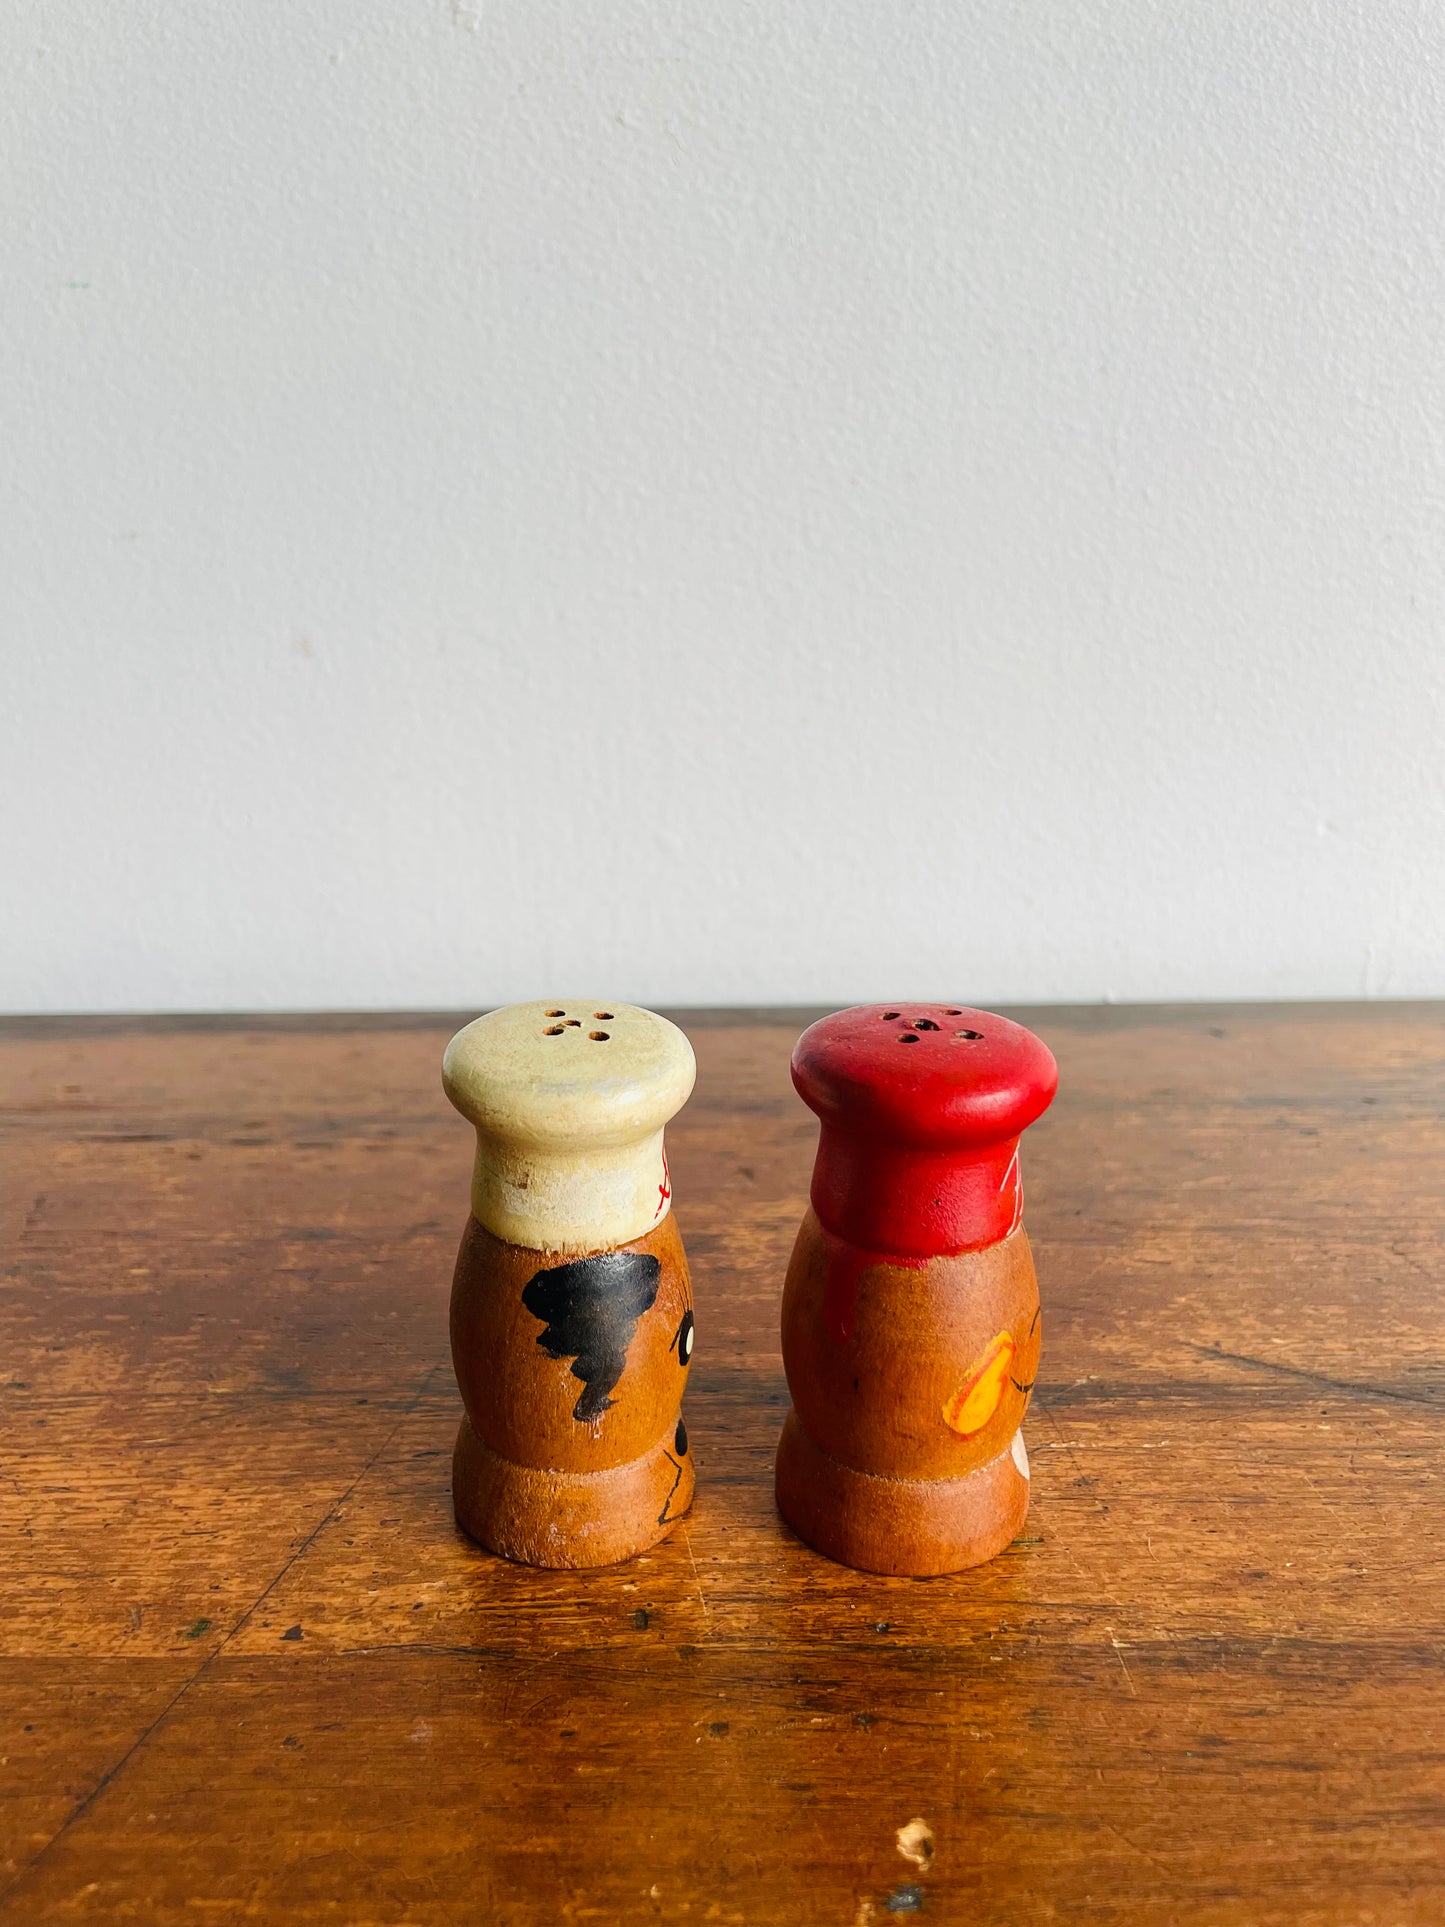 Adorable Wood Salt & Pepper Shakers with Hand Painted Faces